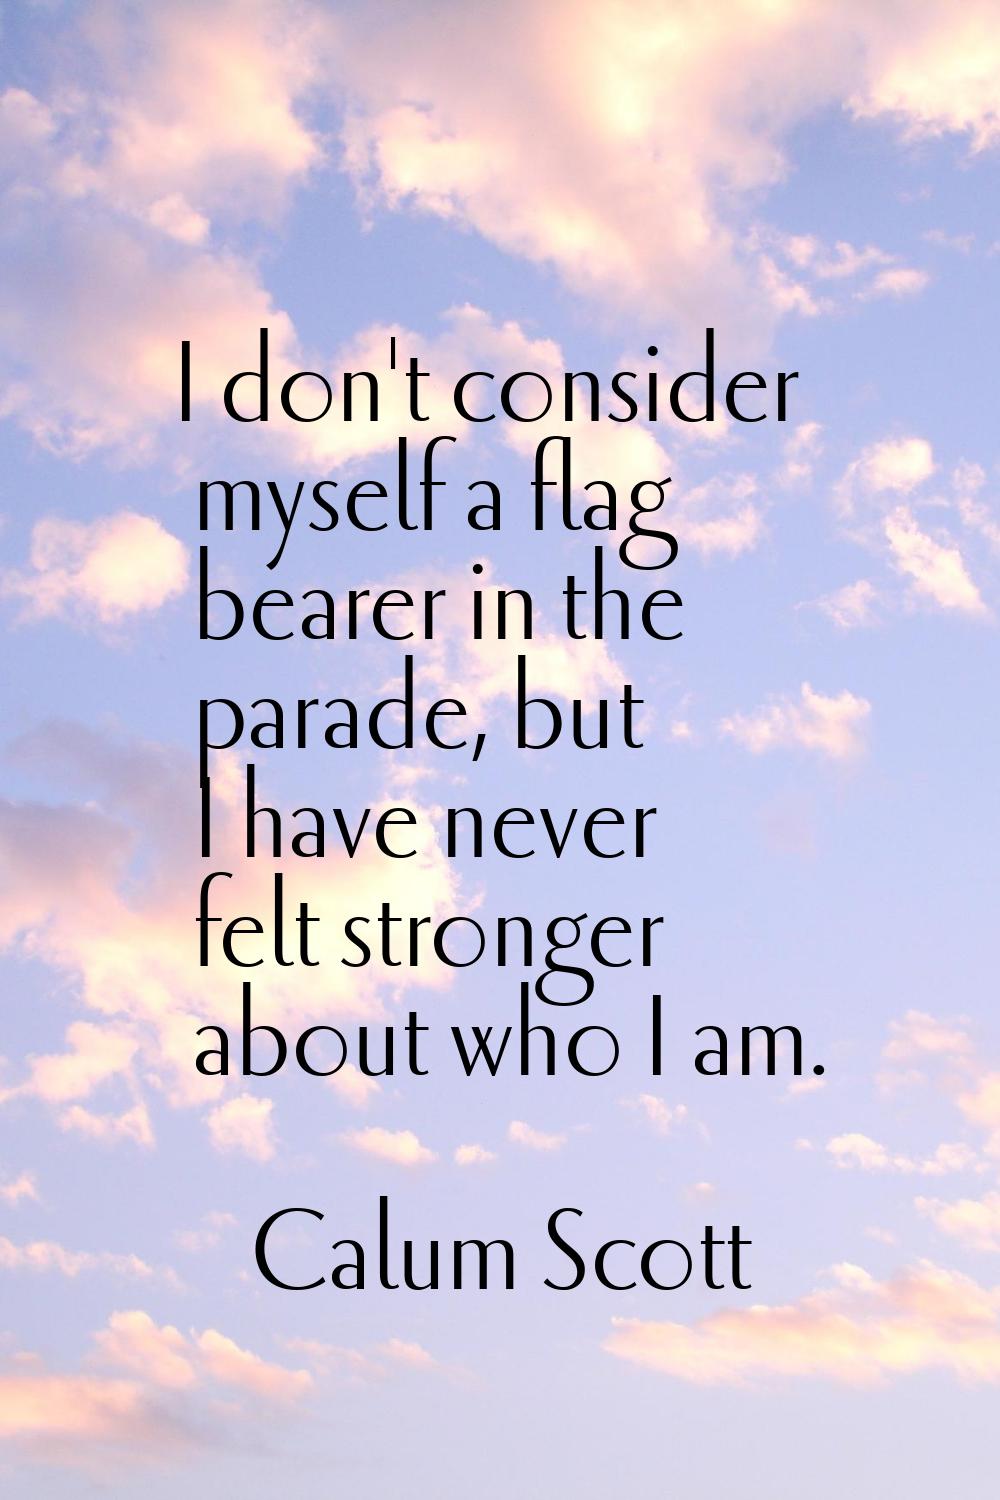 I don't consider myself a flag bearer in the parade, but I have never felt stronger about who I am.